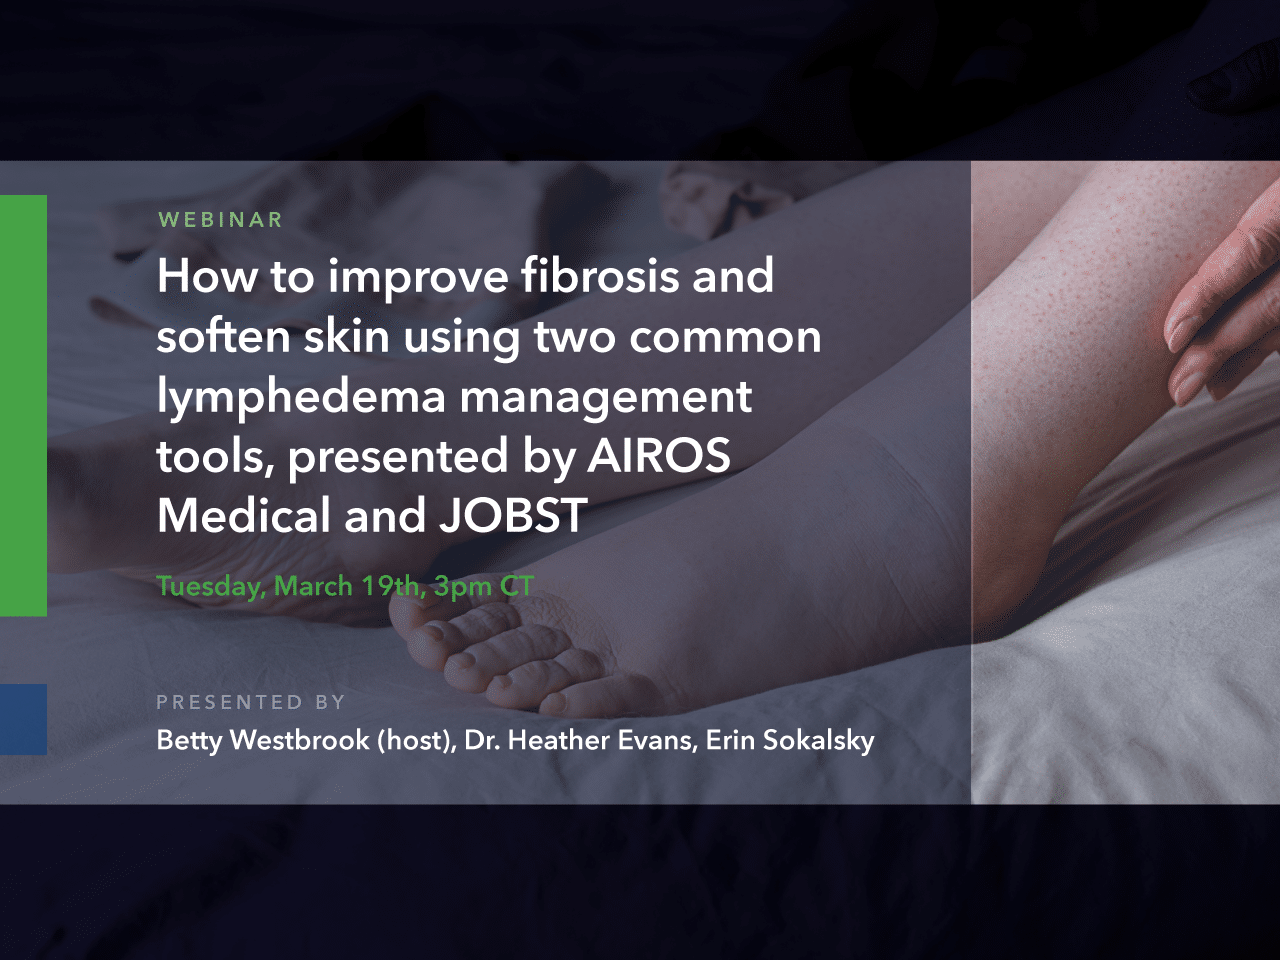 New Lymphedema Management Webinar March 19: How to Improve Fibrosis and Soften Skin